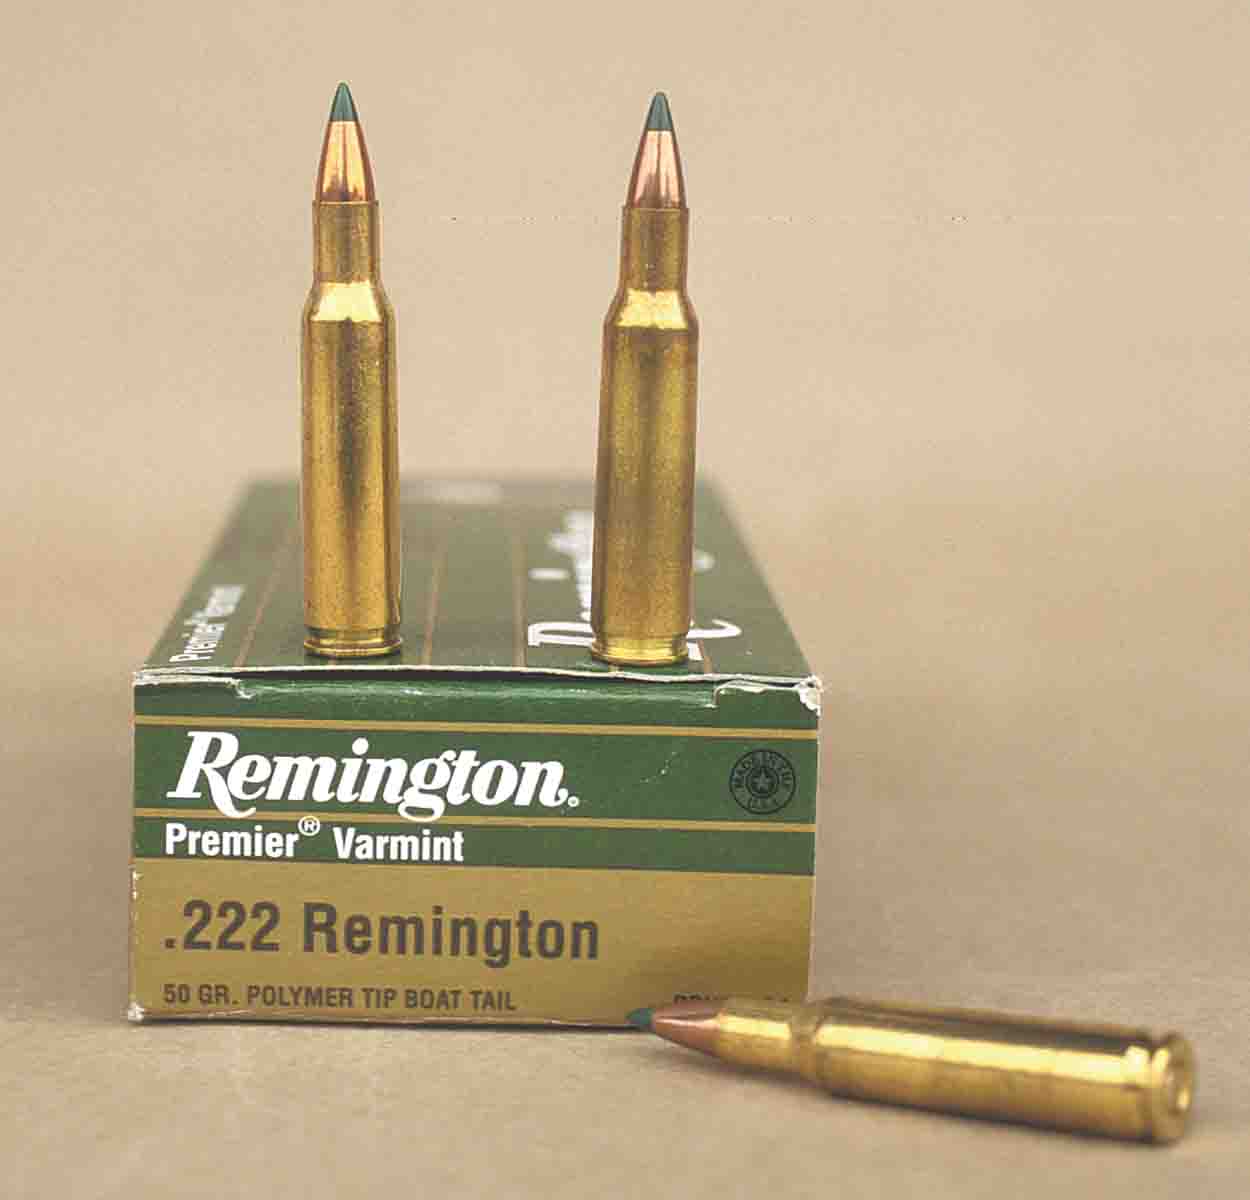 The Remington factory fodder pushed the 50-grain polymer boat-tail 3,185 fps.